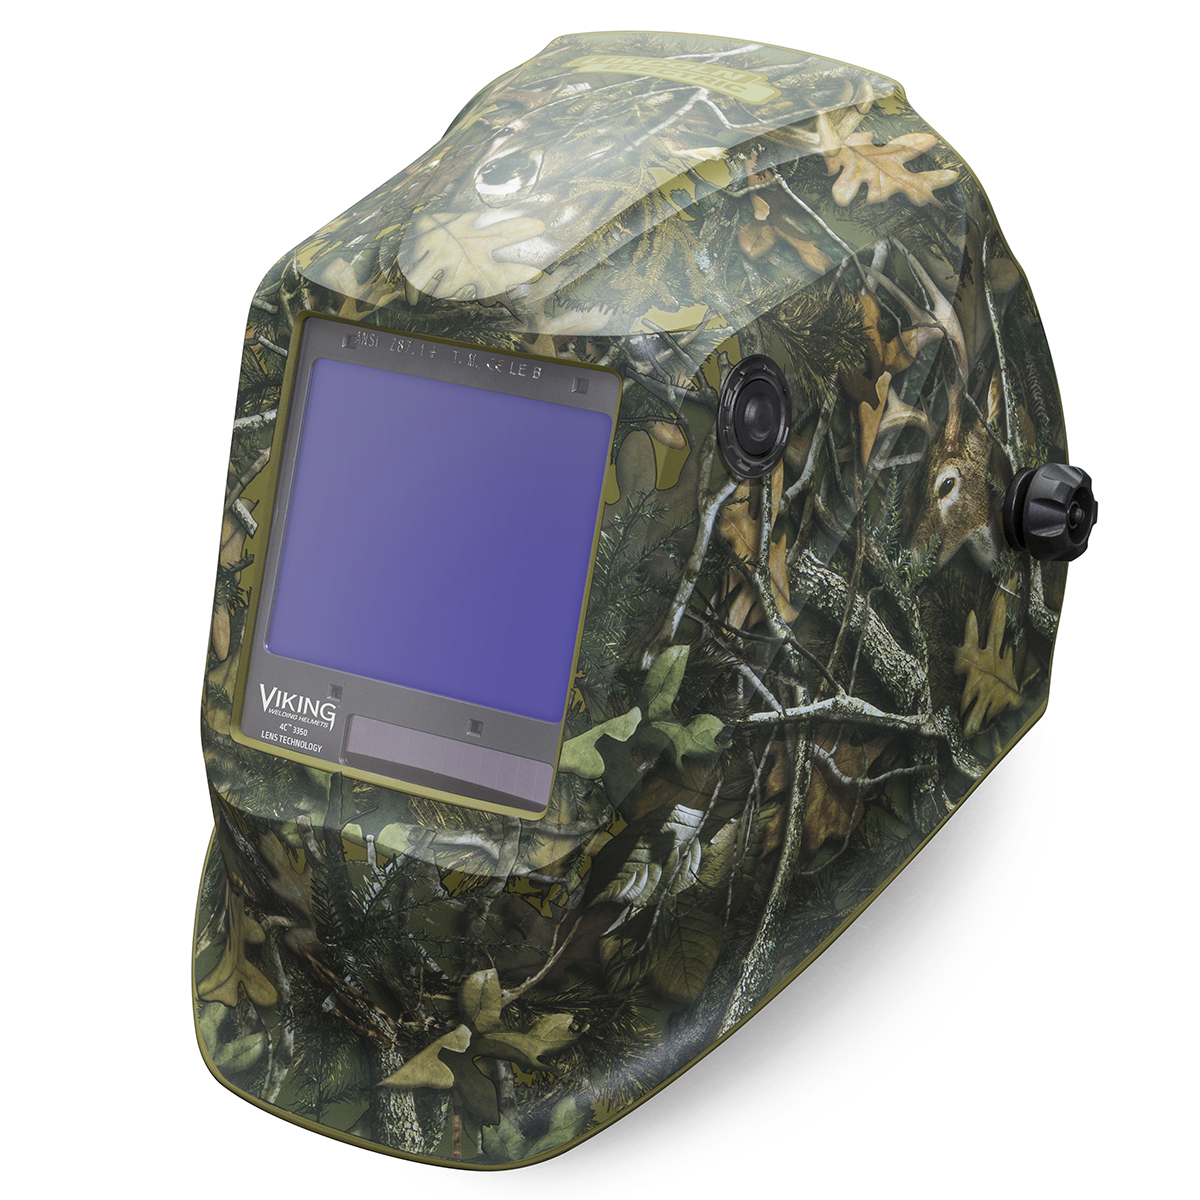 Lincoln Electric® VIKING® 3350 Camouflage Welding Helmet With Variable Shades 5 - 13 Auto Darkening Lens, 4C® Lens Technology An